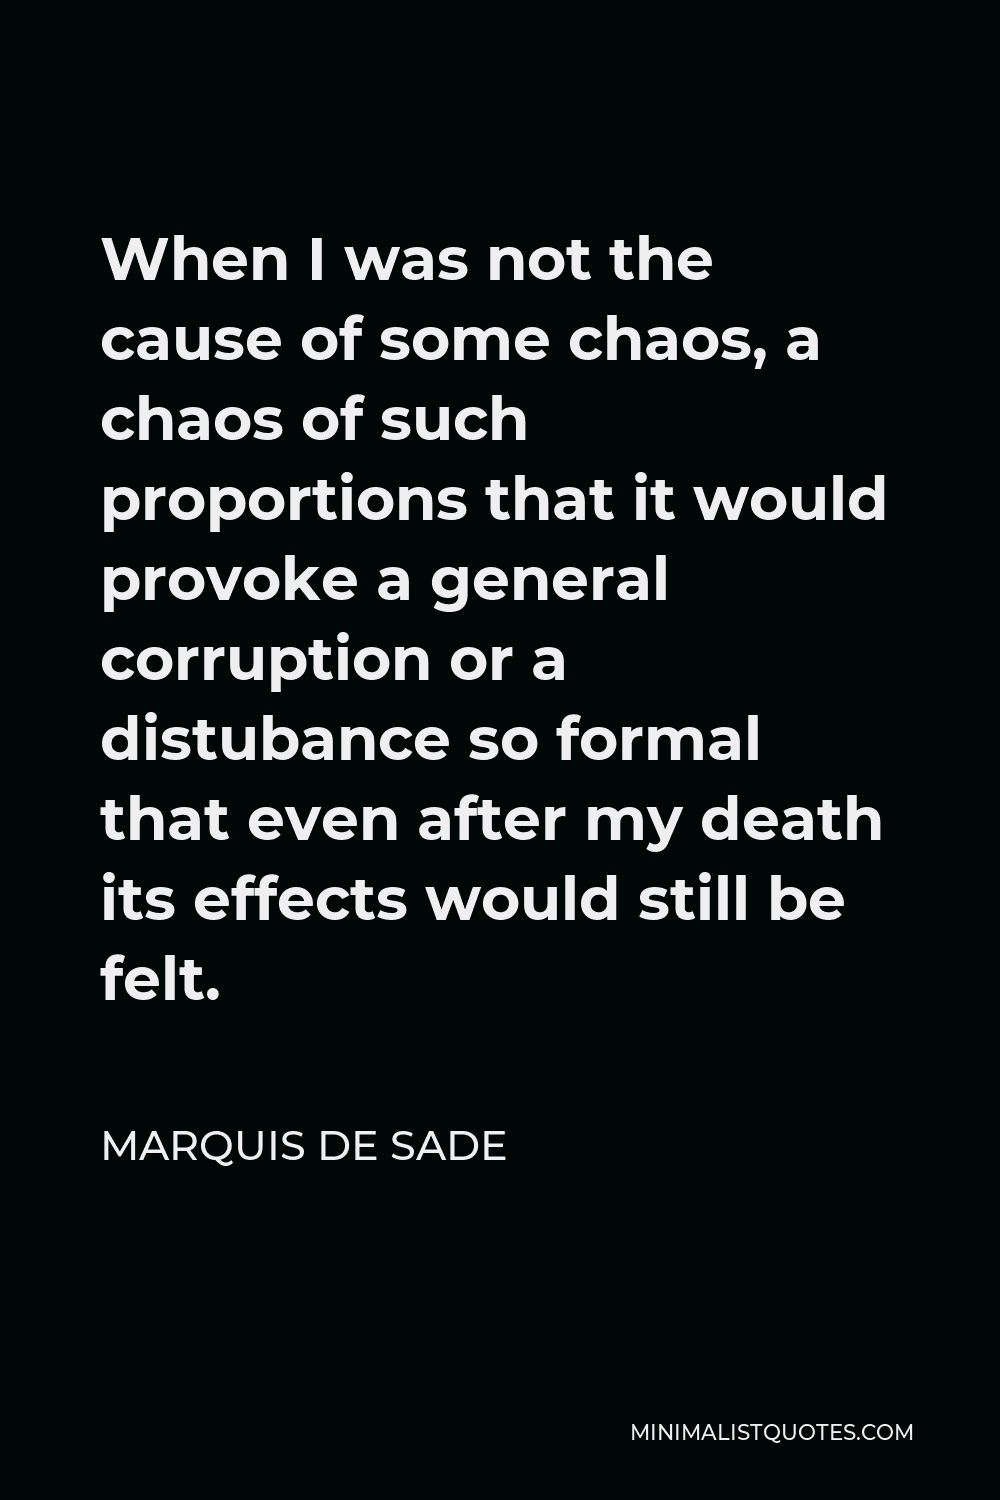 Marquis de Sade Quote - When I was not the cause of some chaos, a chaos of such proportions that it would provoke a general corruption or a distubance so formal that even after my death its effects would still be felt.